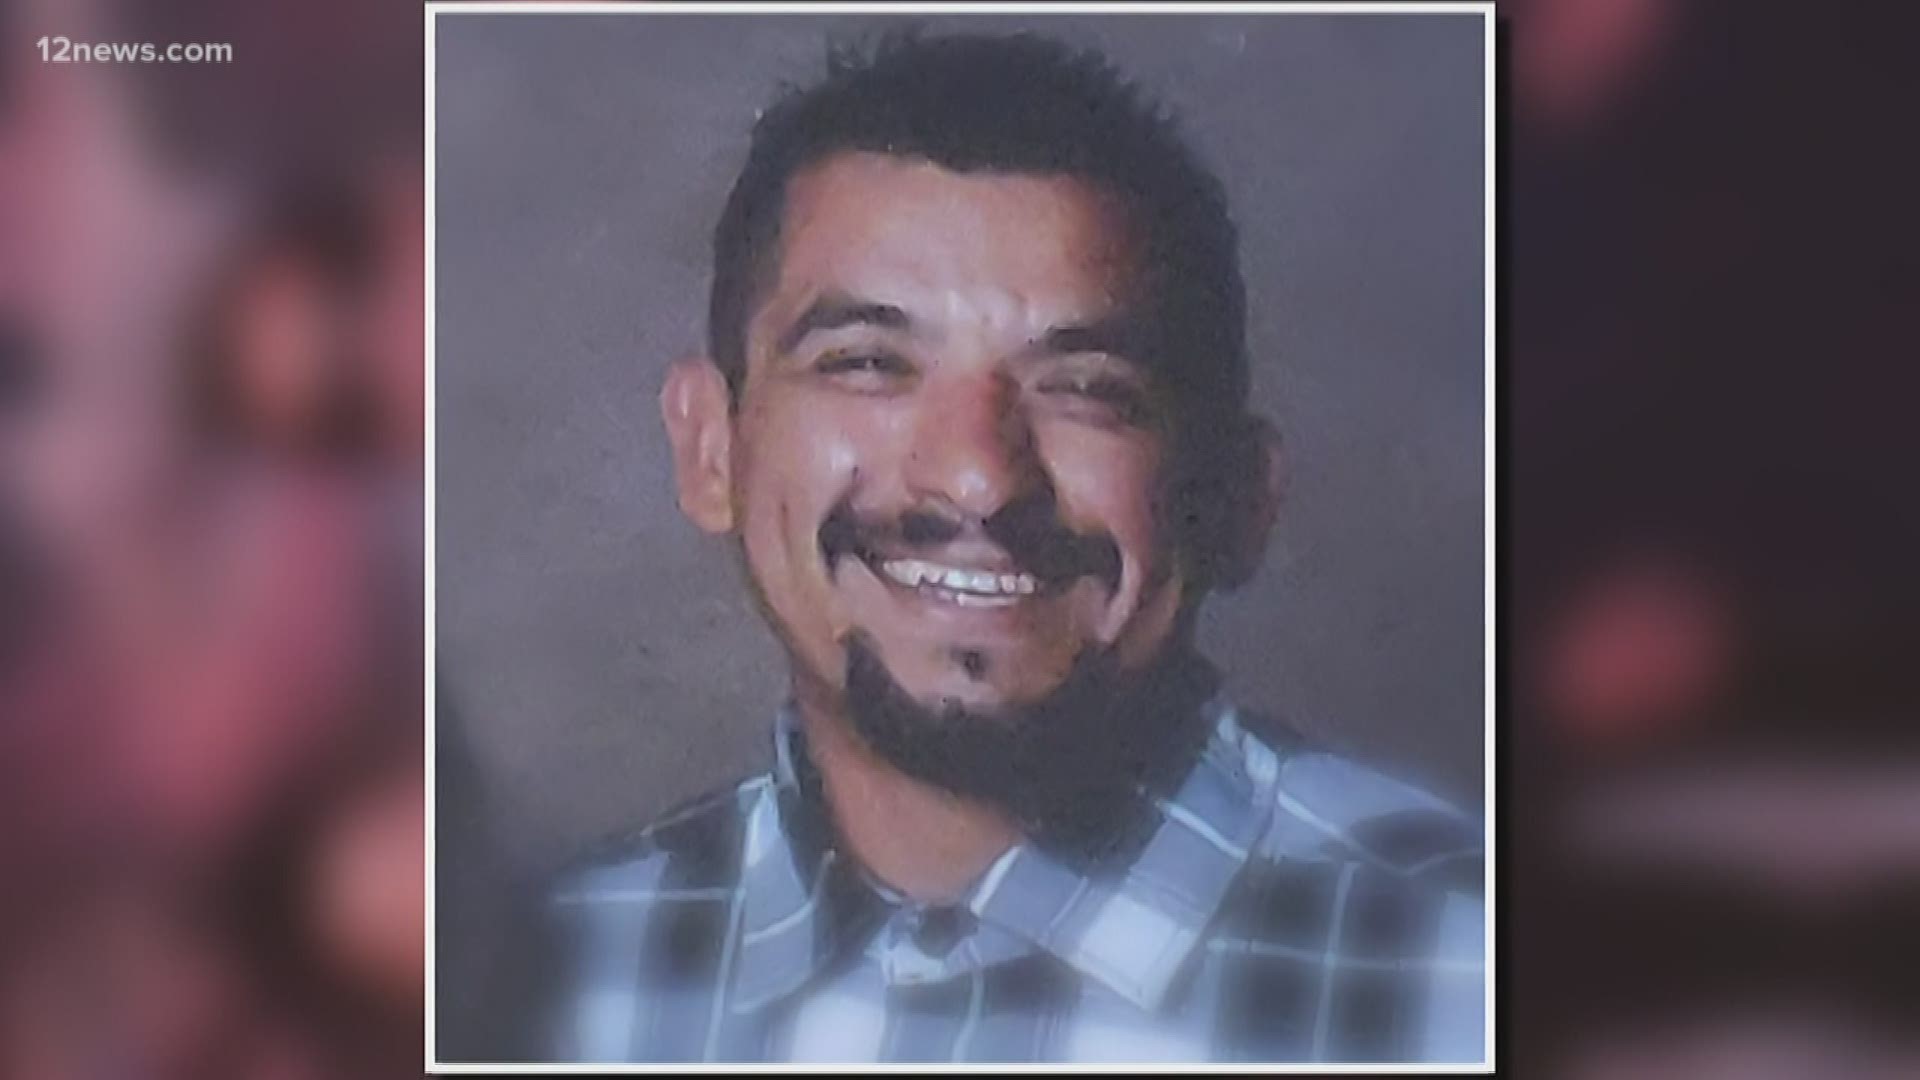 A Glendale family has been devastated by a deadly hit and run crash that took the life of 39-year-old Carlos Chavez. Carlos' actions saved his 17-year-old daughter.